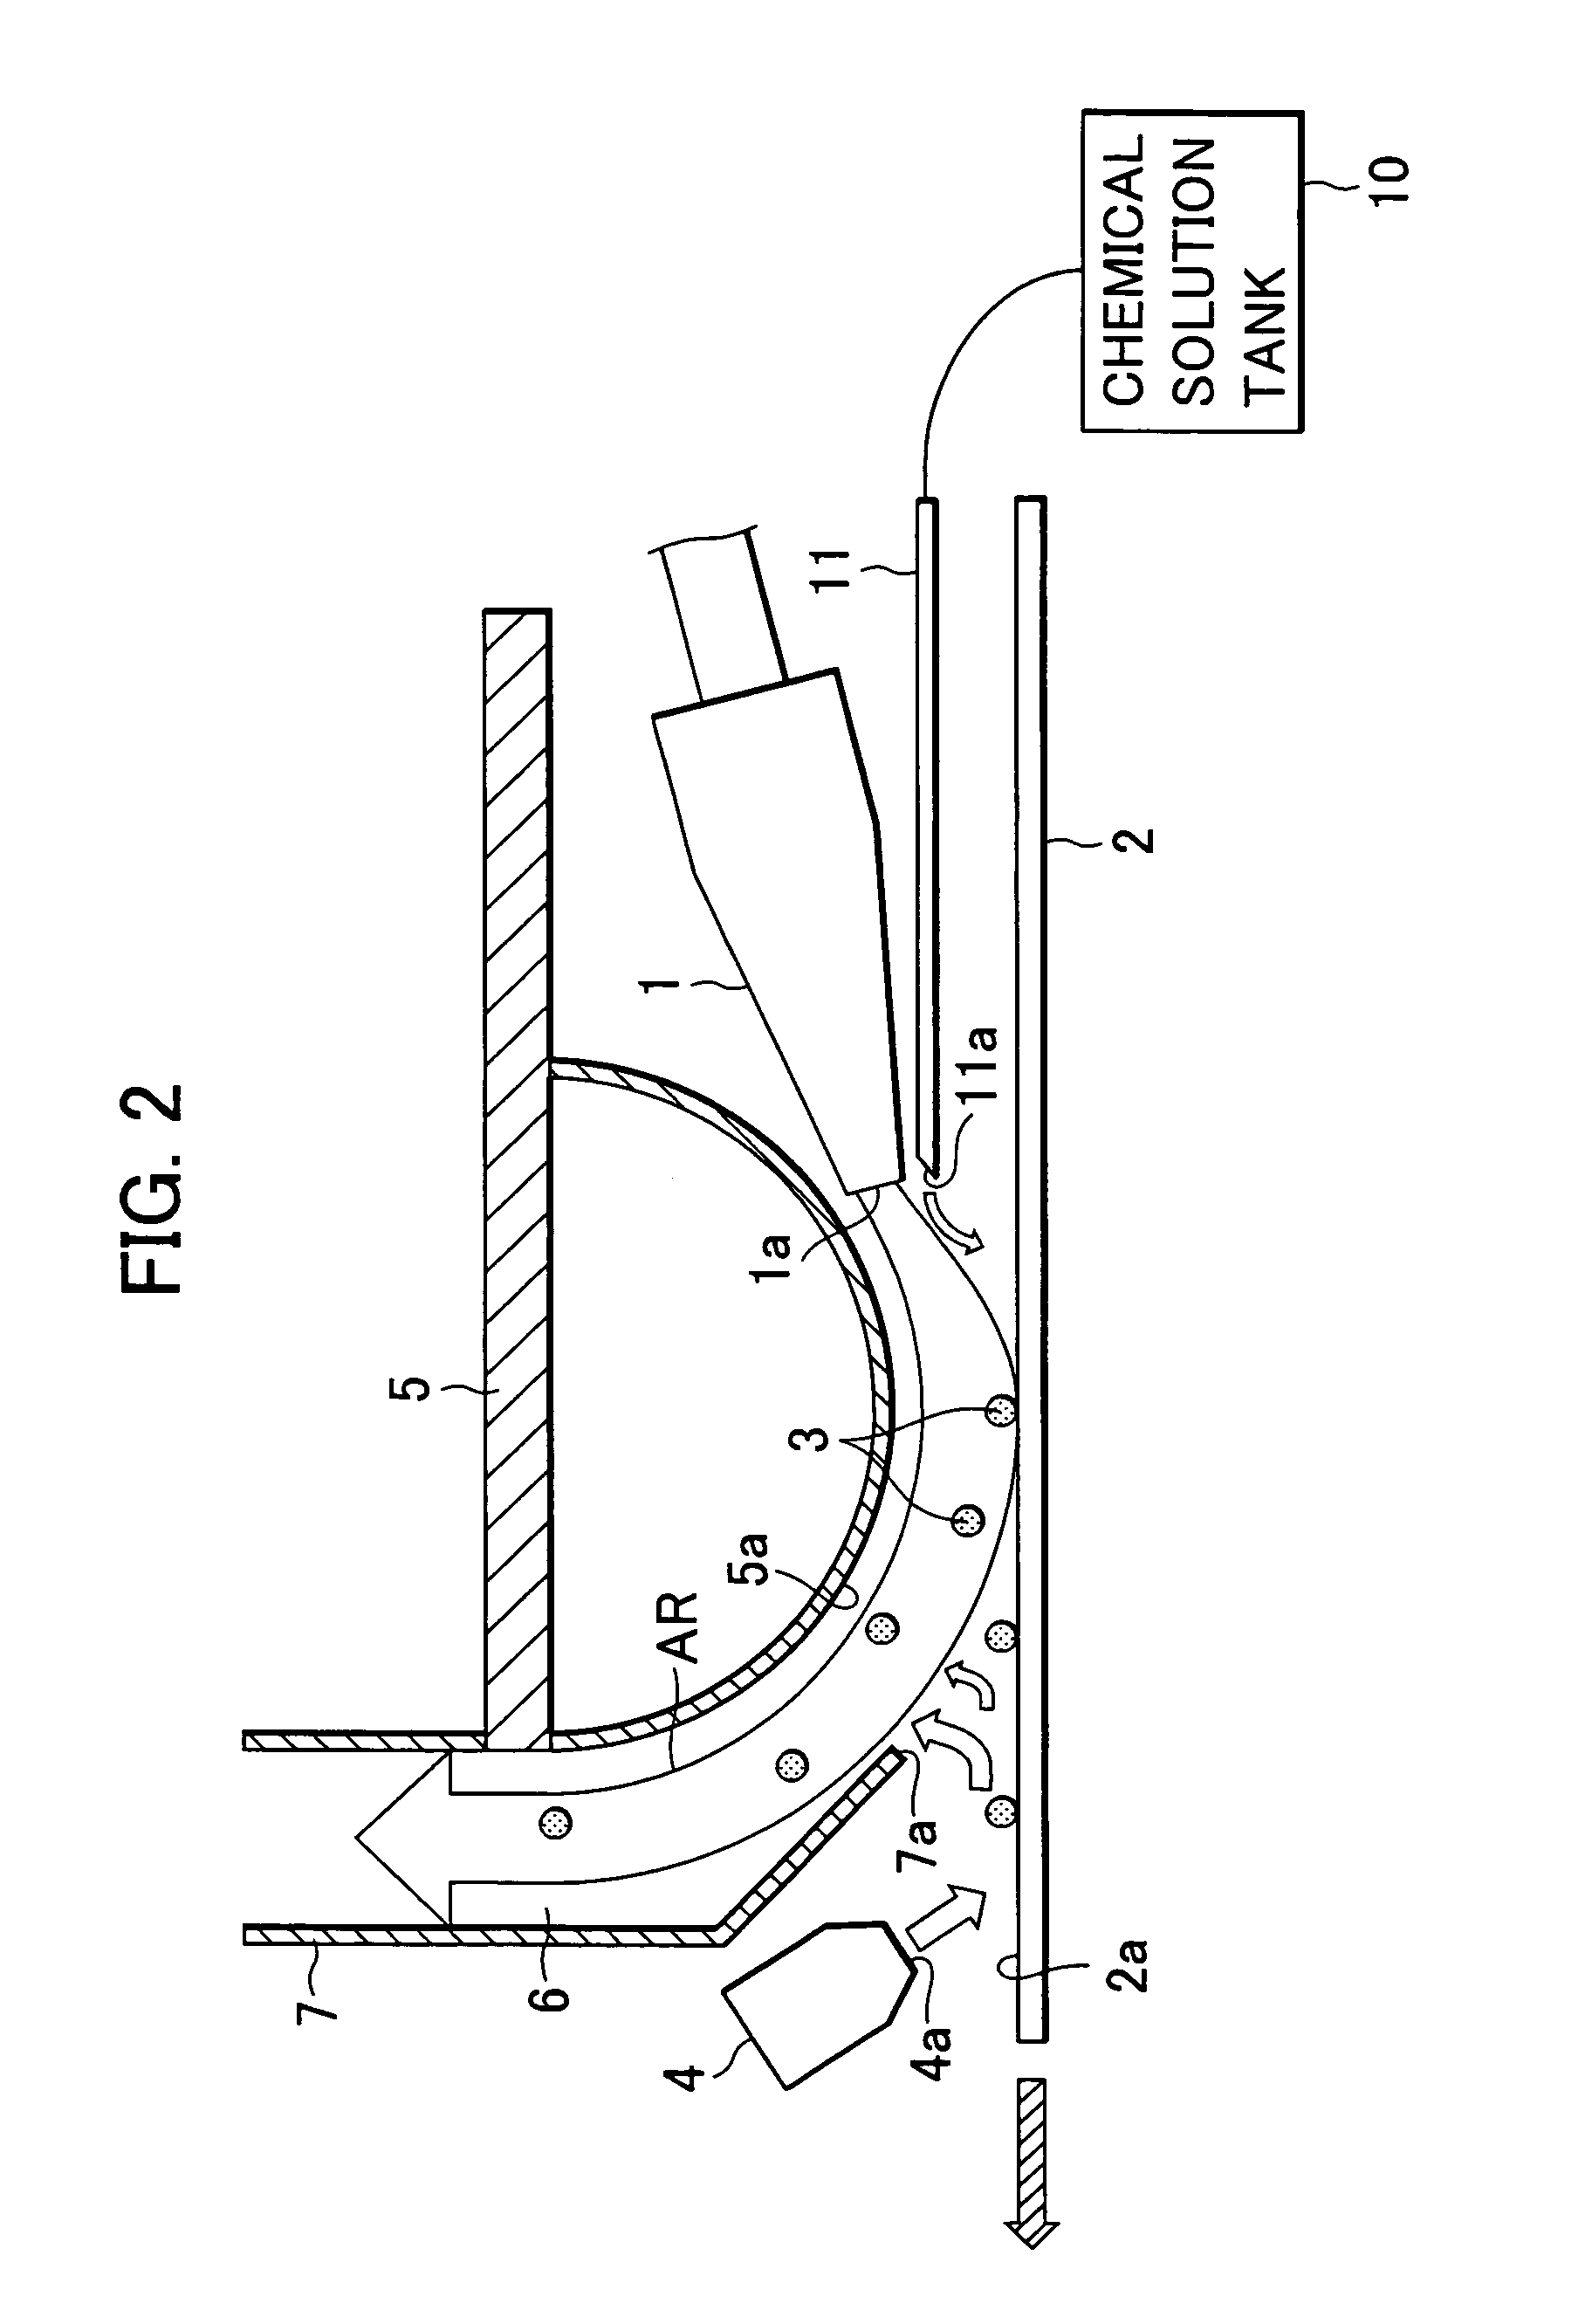 Apparatus and method for cleaning a surface with high pressure air